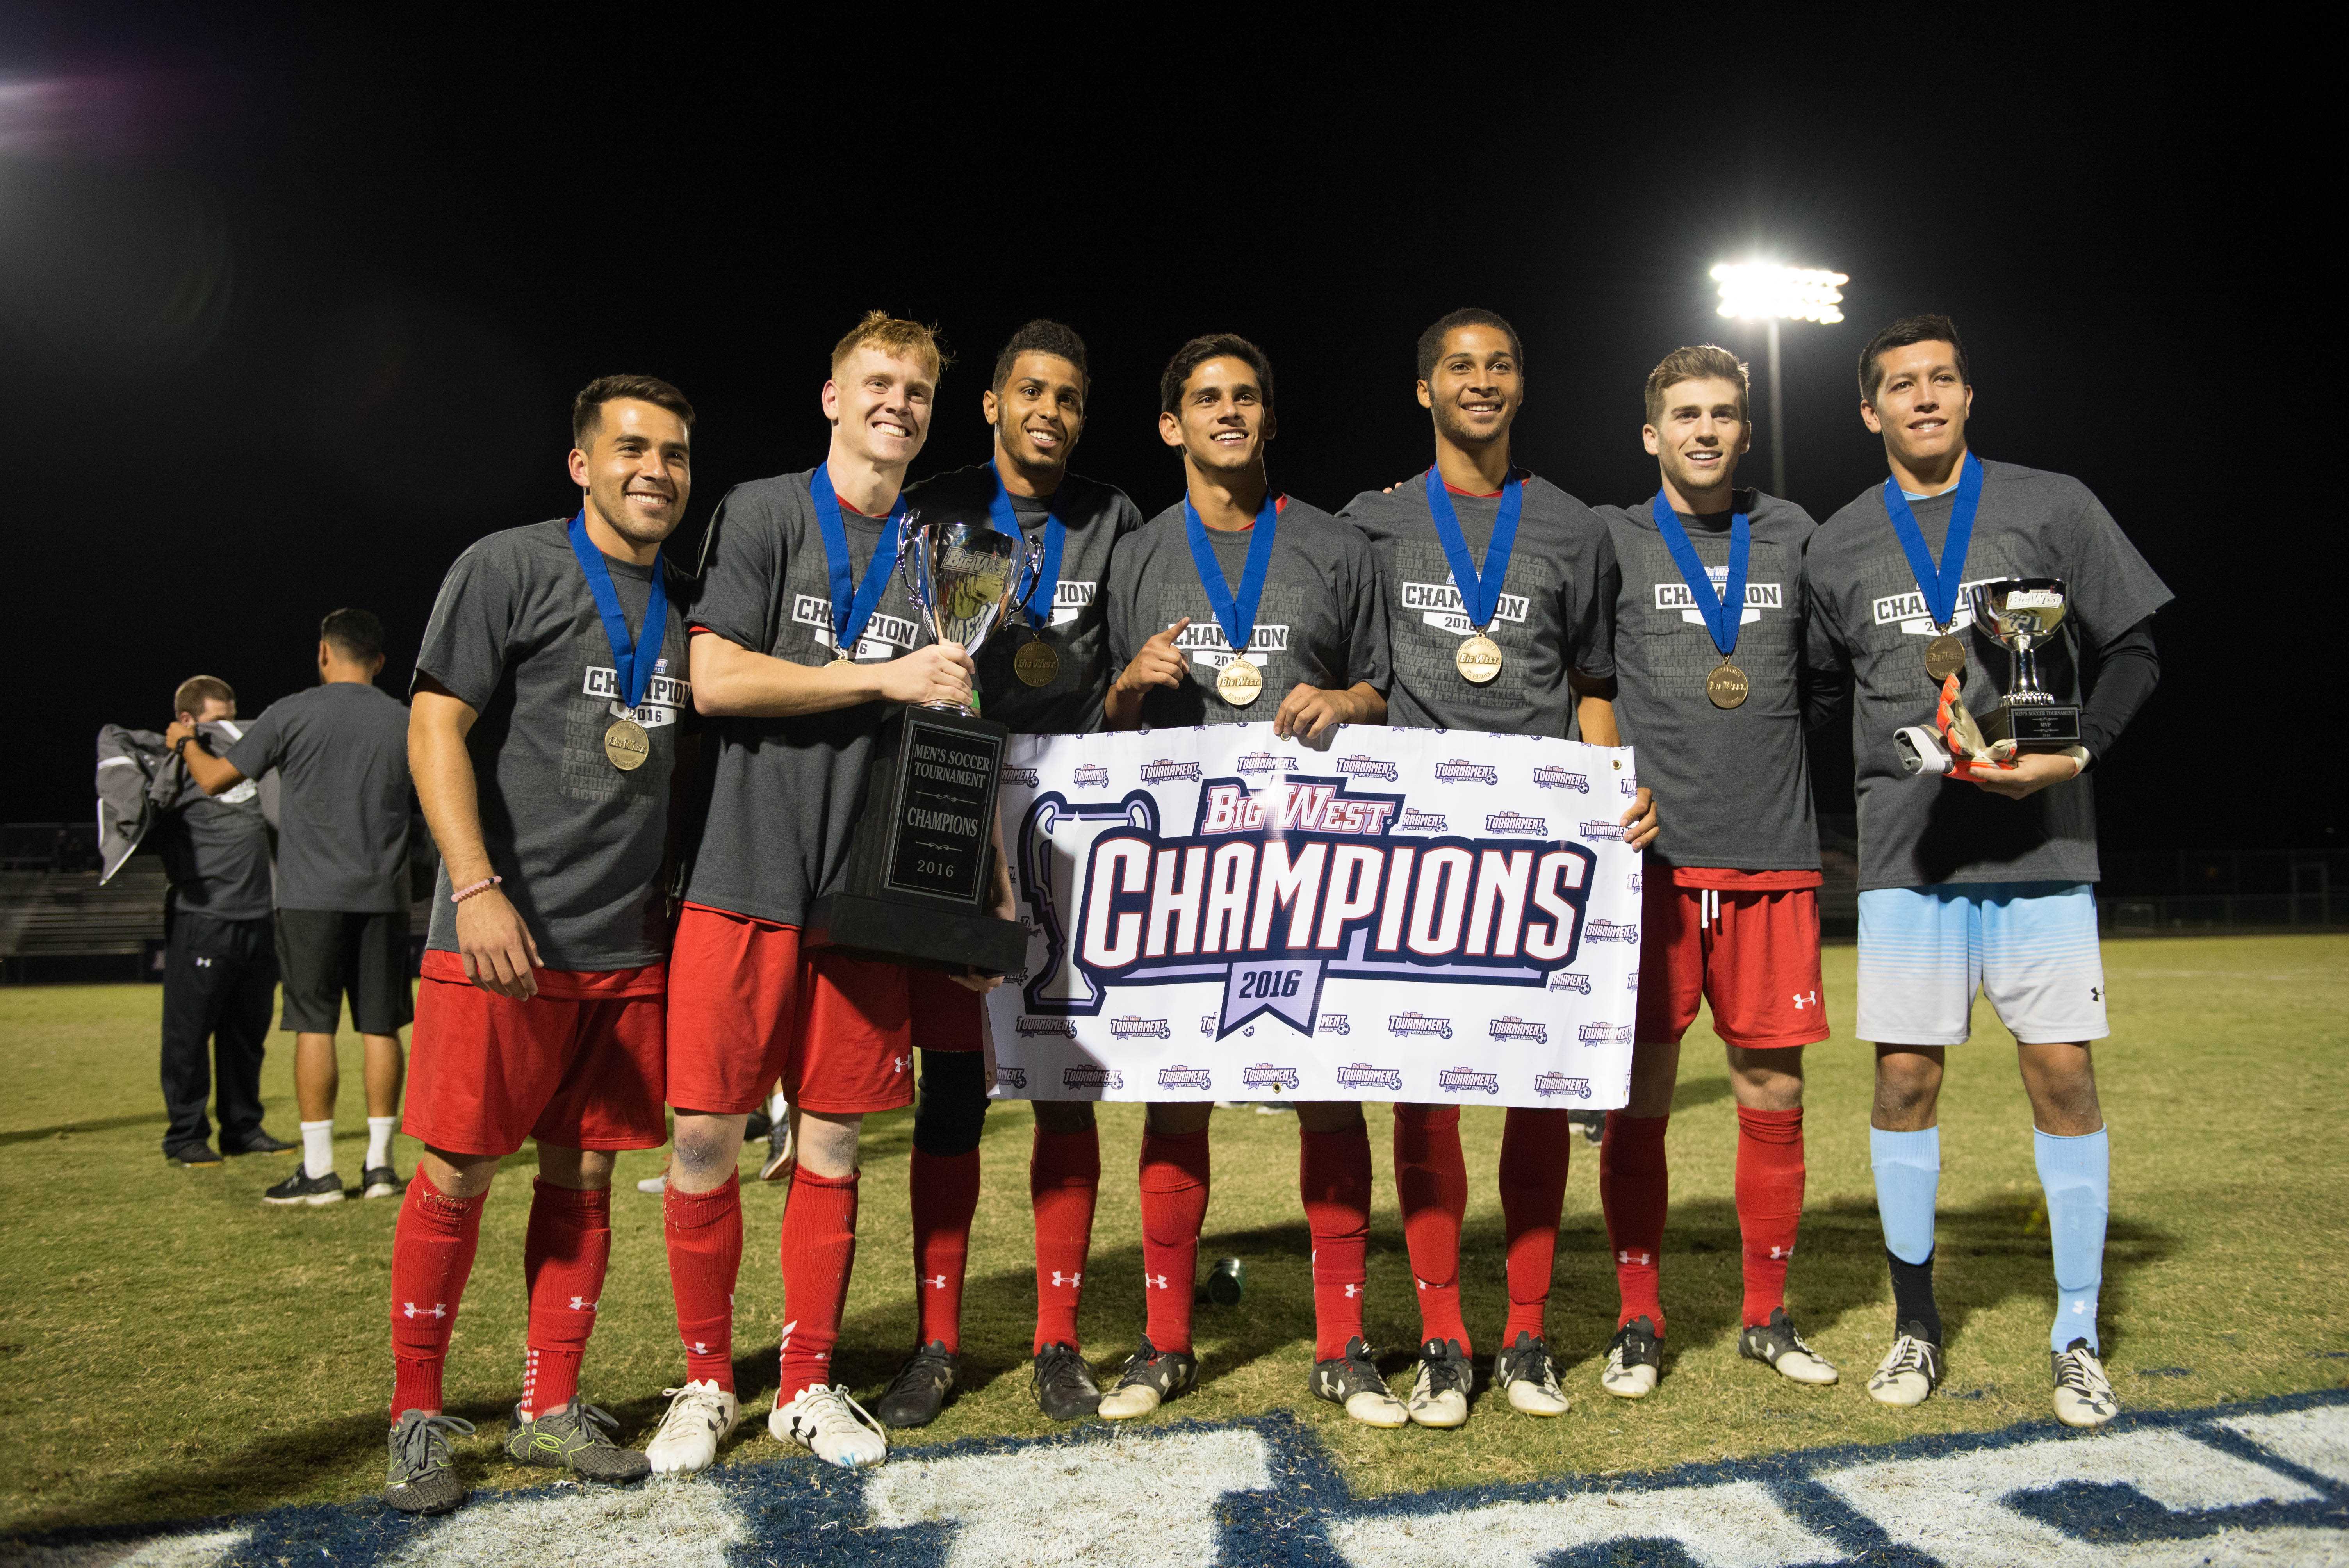 Seven men are posing with medals, trophies, and a sign which says, Big West Champions